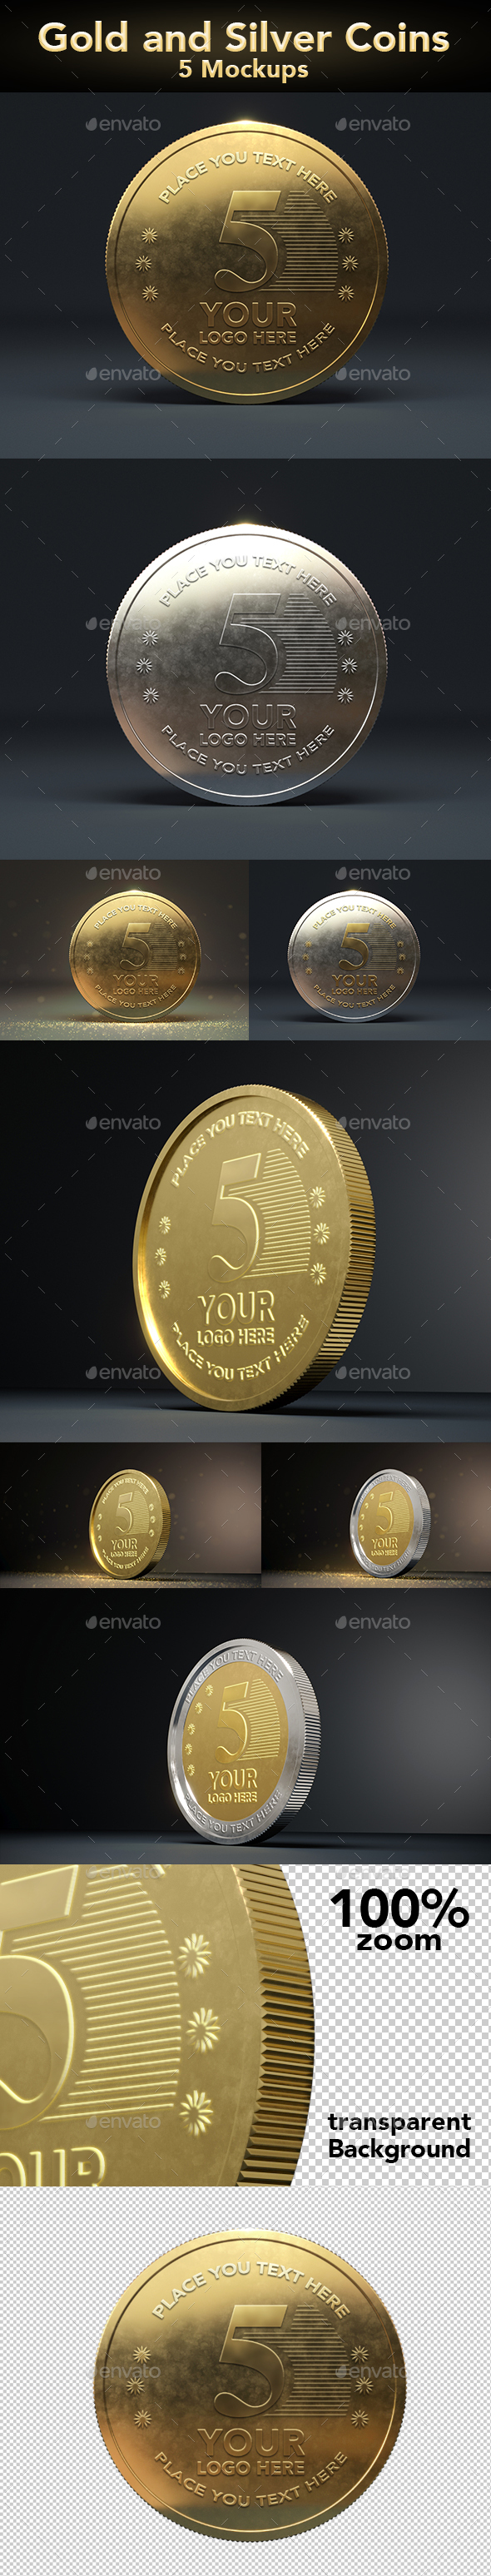 Download Gold Coin Mockups By Gio Keresa Graphicriver